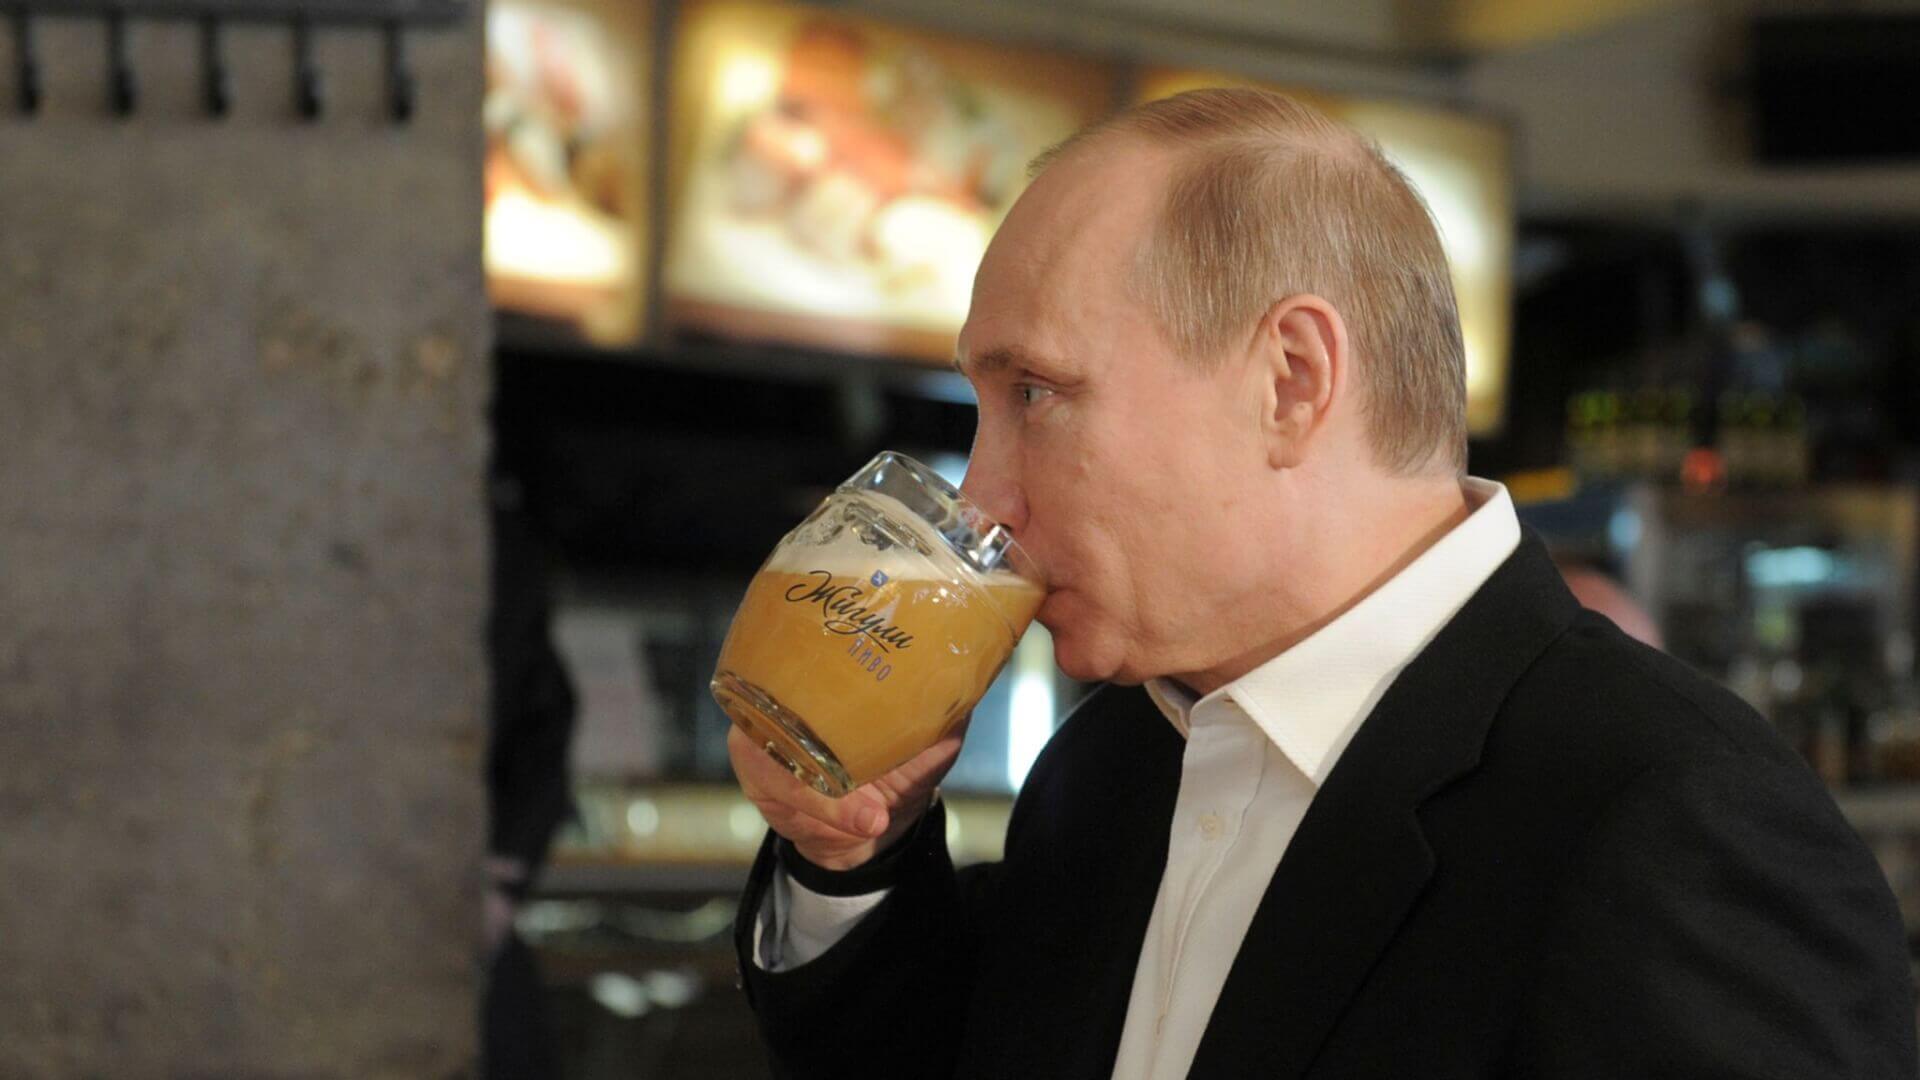 Russia’s Putin ‘Temporarily’ Nationalises Assets of Foreign Companies Carlsberg, Danone